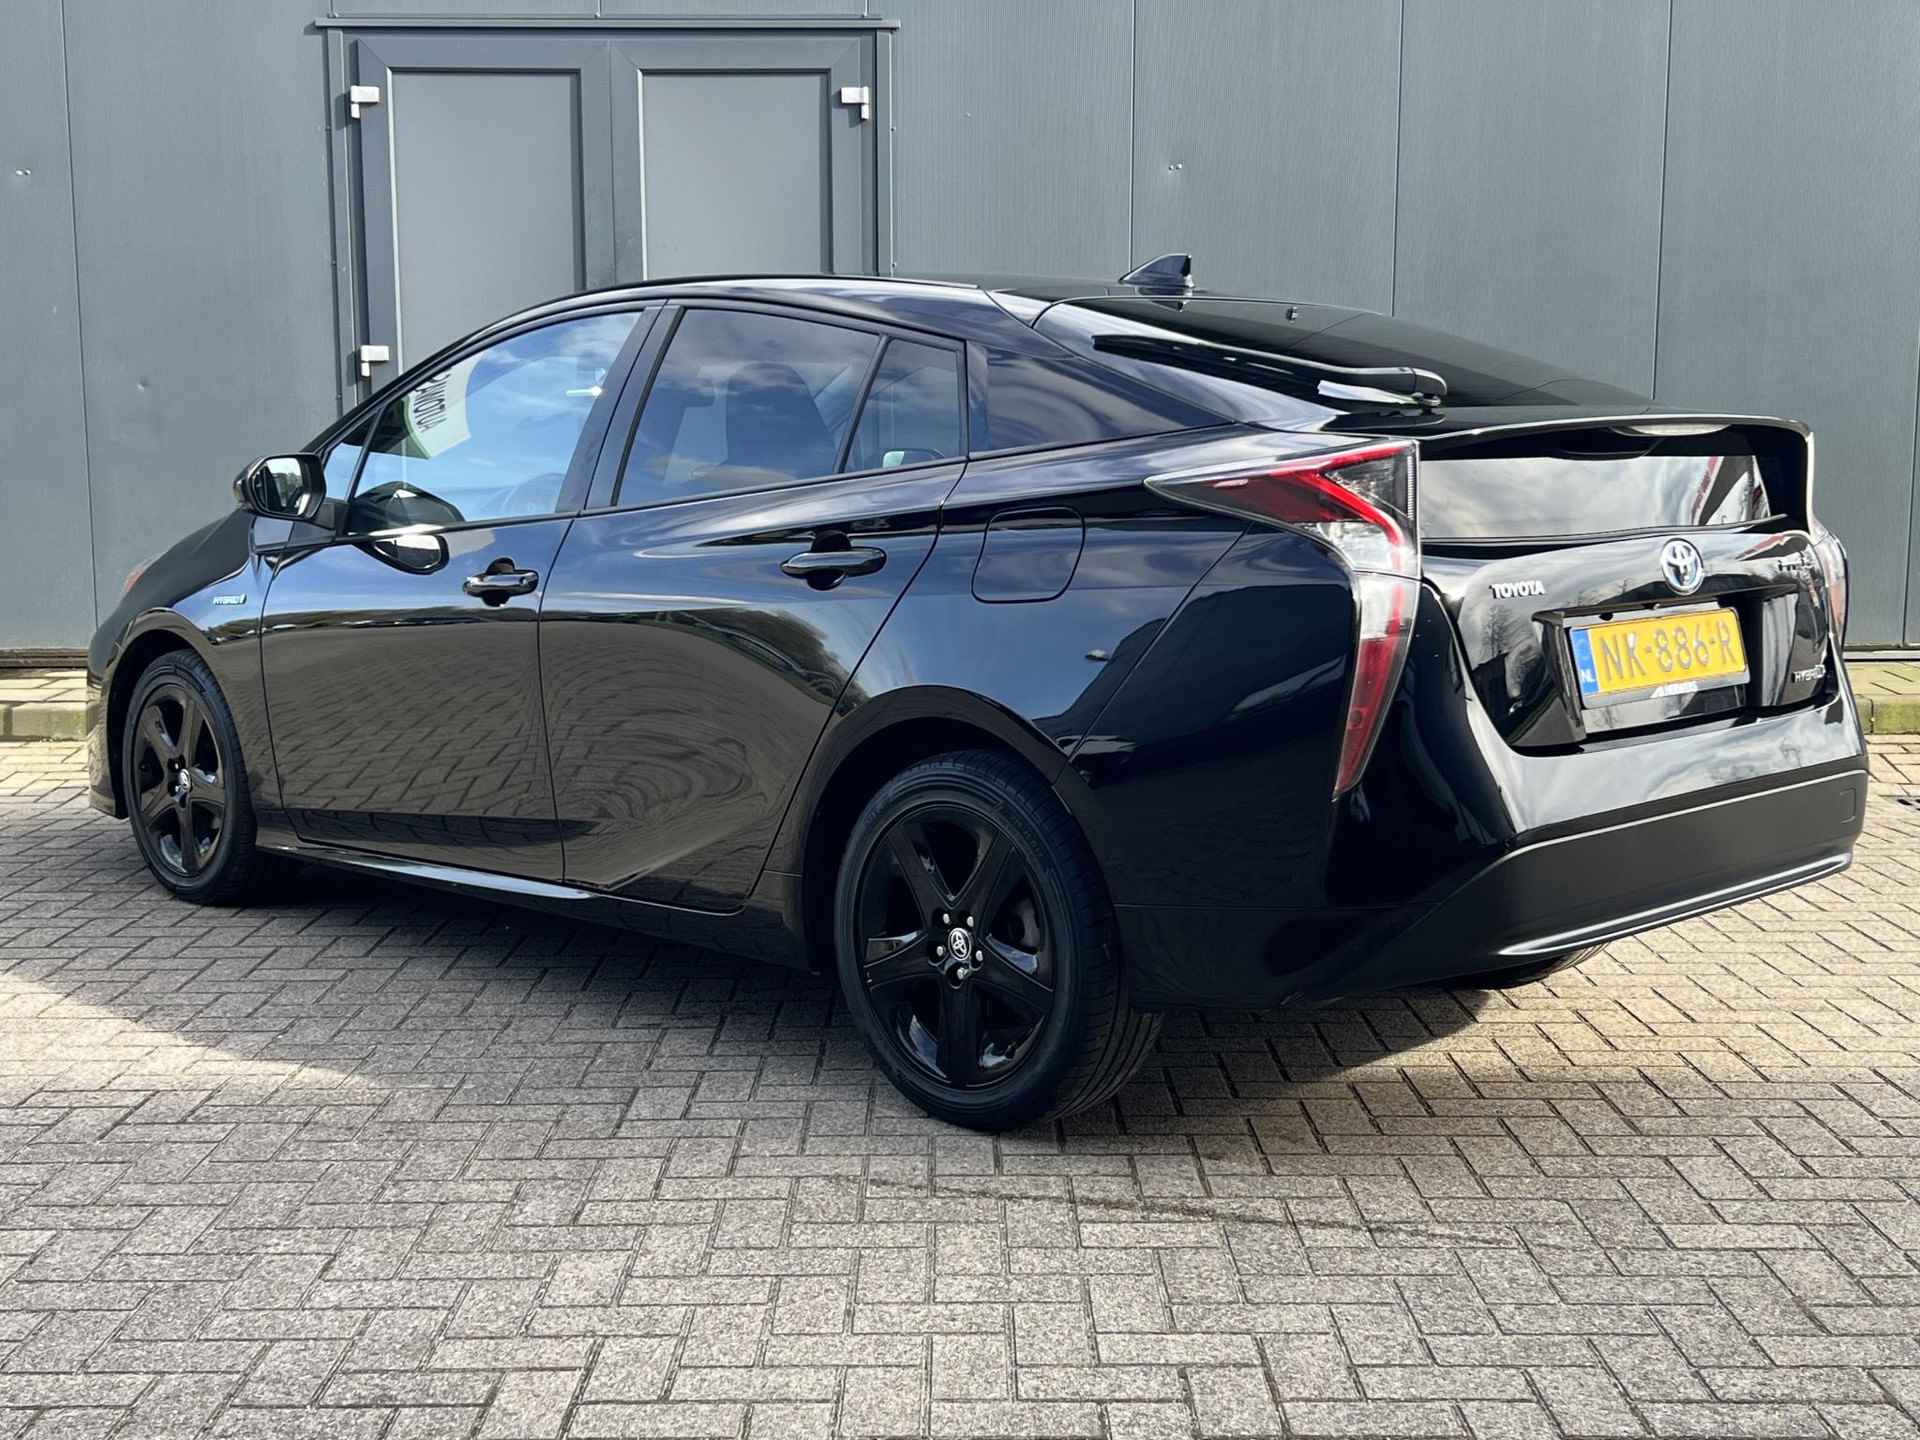 Toyota Prius 1.8 First Edition Automaat / Navigatie / Cruise Control / Climate Control / Stoelverwarming / DAB / Bluetooth / Head-Up Display / Dodehoek Herkenning / Camera - 16/30